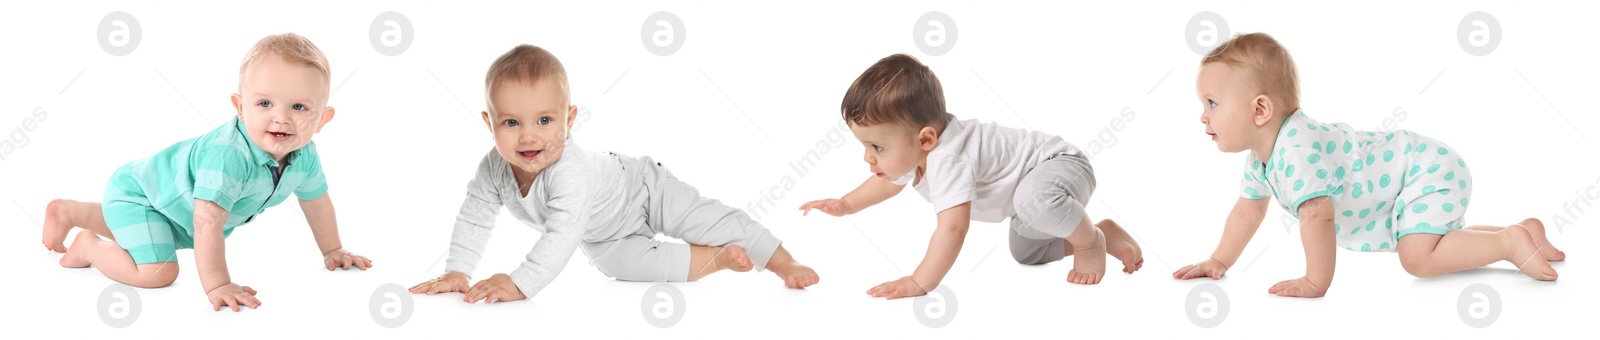 Image of Collage with photos cute little babies crawling on white background. Banner design